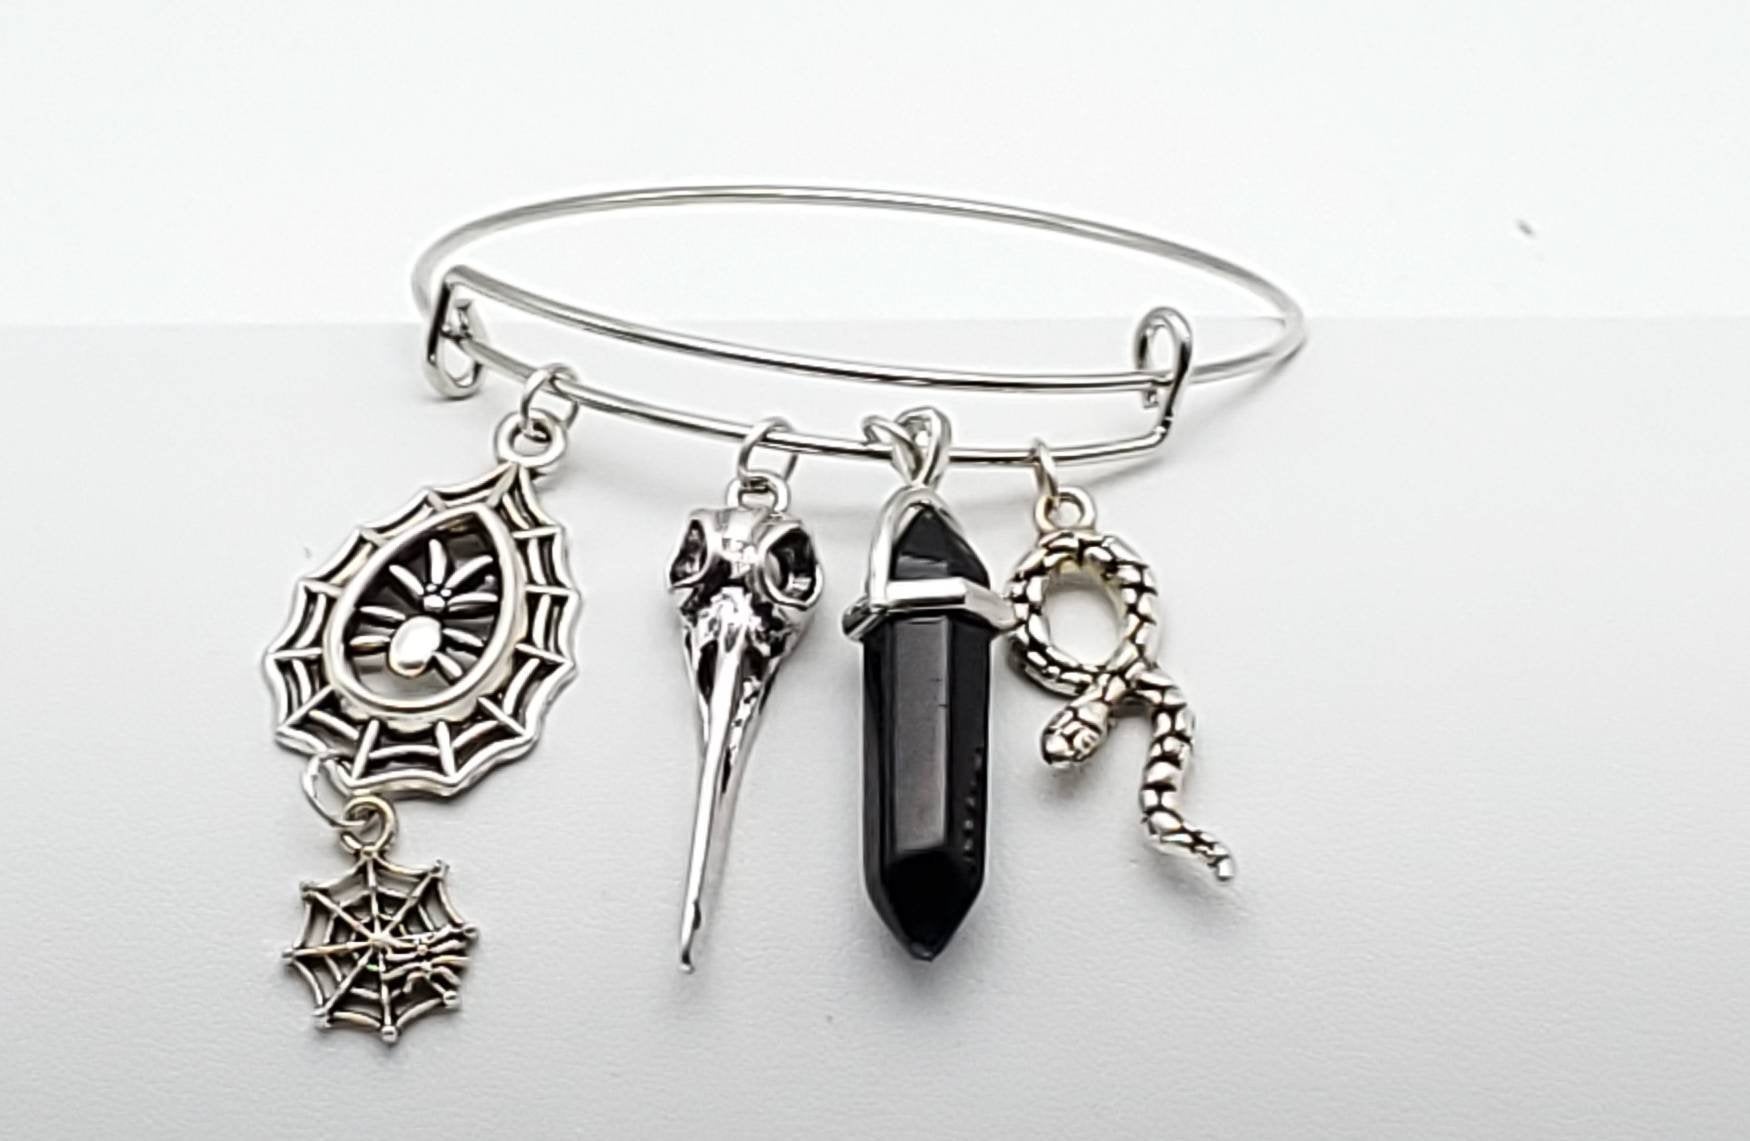 Charm Bangle with Spider Webs, Bird Skull and Snake Charms and Black Onyx Crystal - The Caffeinated Raven